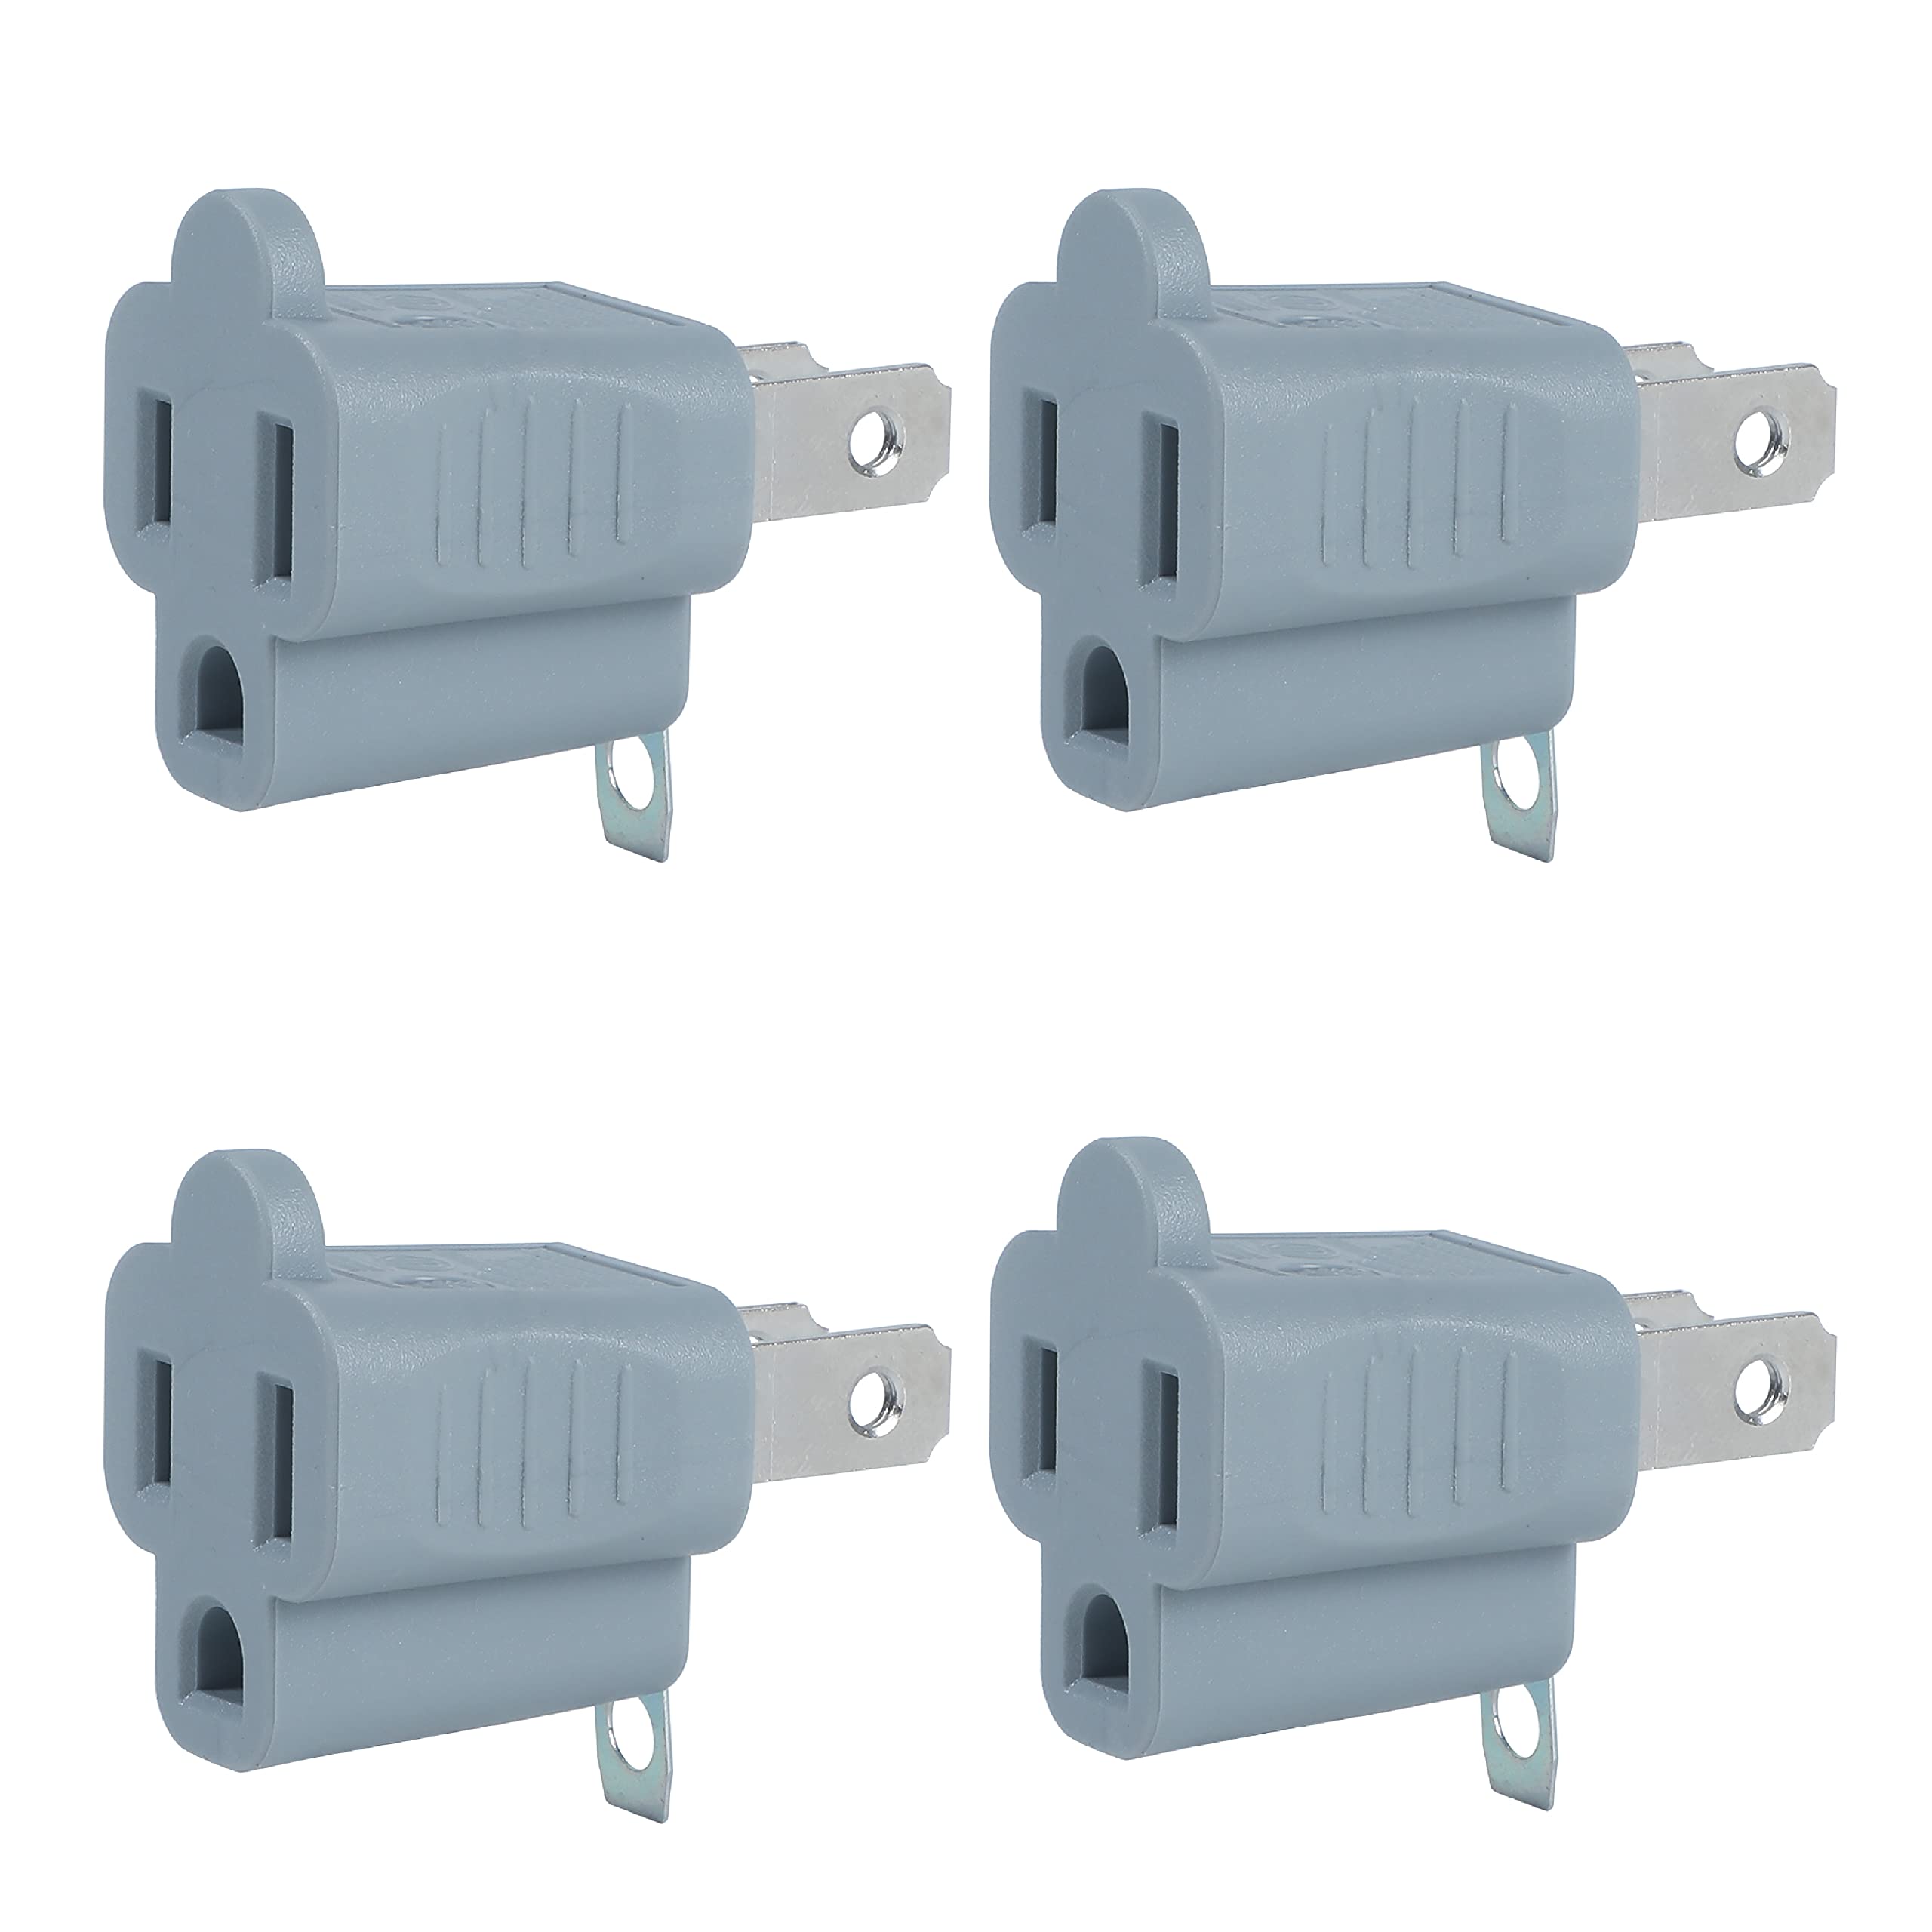 Coby 2 Prong To 3 Prong Outlet Adapter – 4 Pack